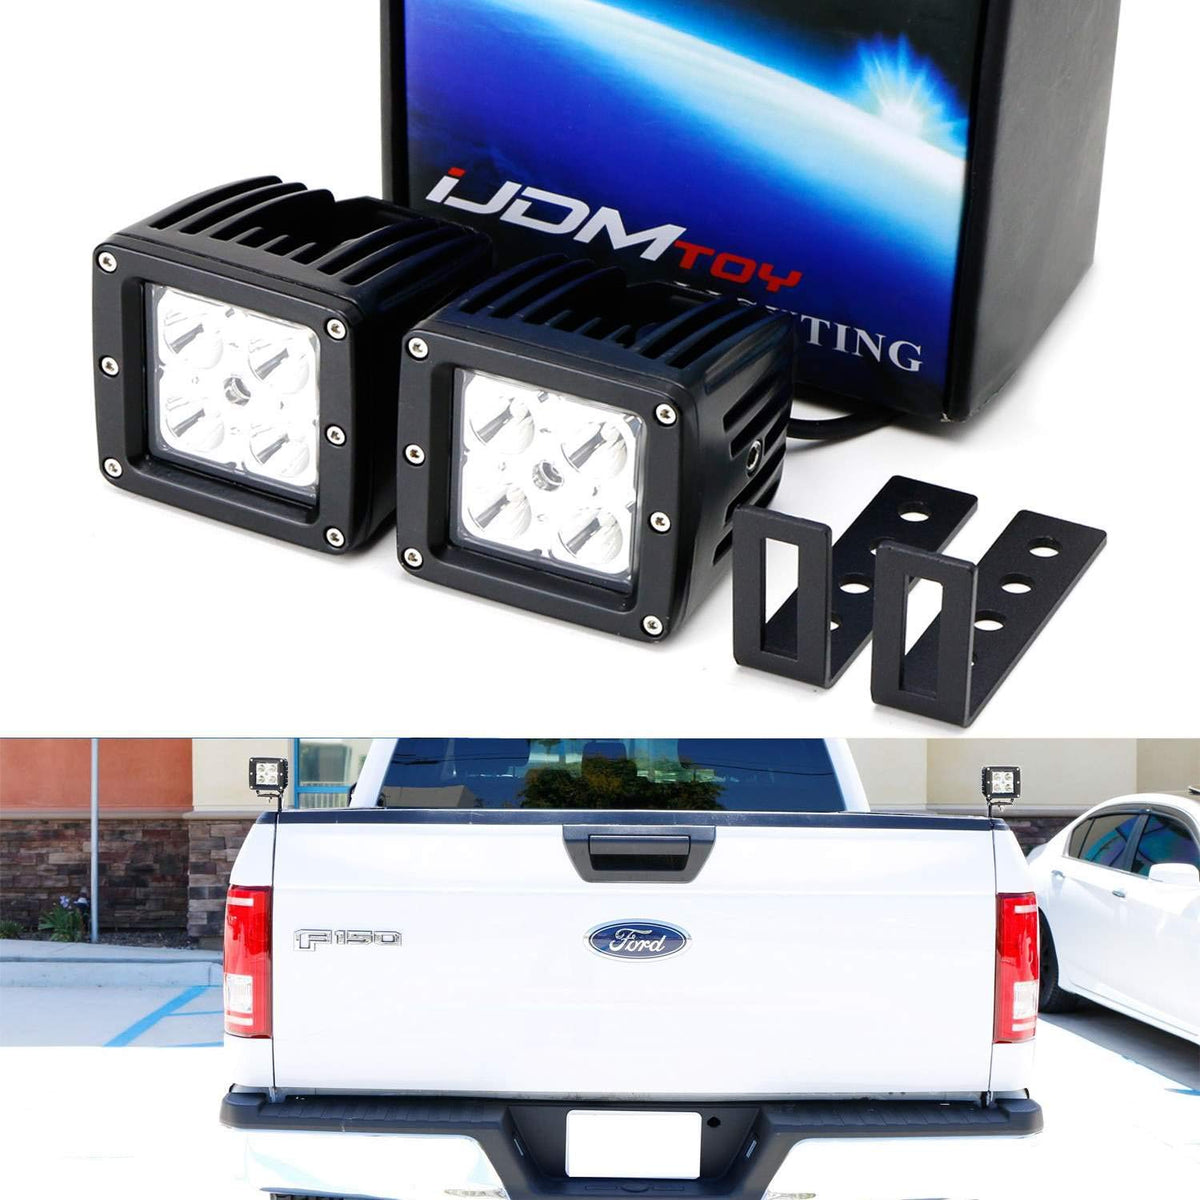 Truck Bed Led Pod Light Kit For 2015 Up Ford F150 2017 Up F250 F350 F450 2 20w High Power Cree Led Pods Rear Truck Bed Corner Mounting Brackets